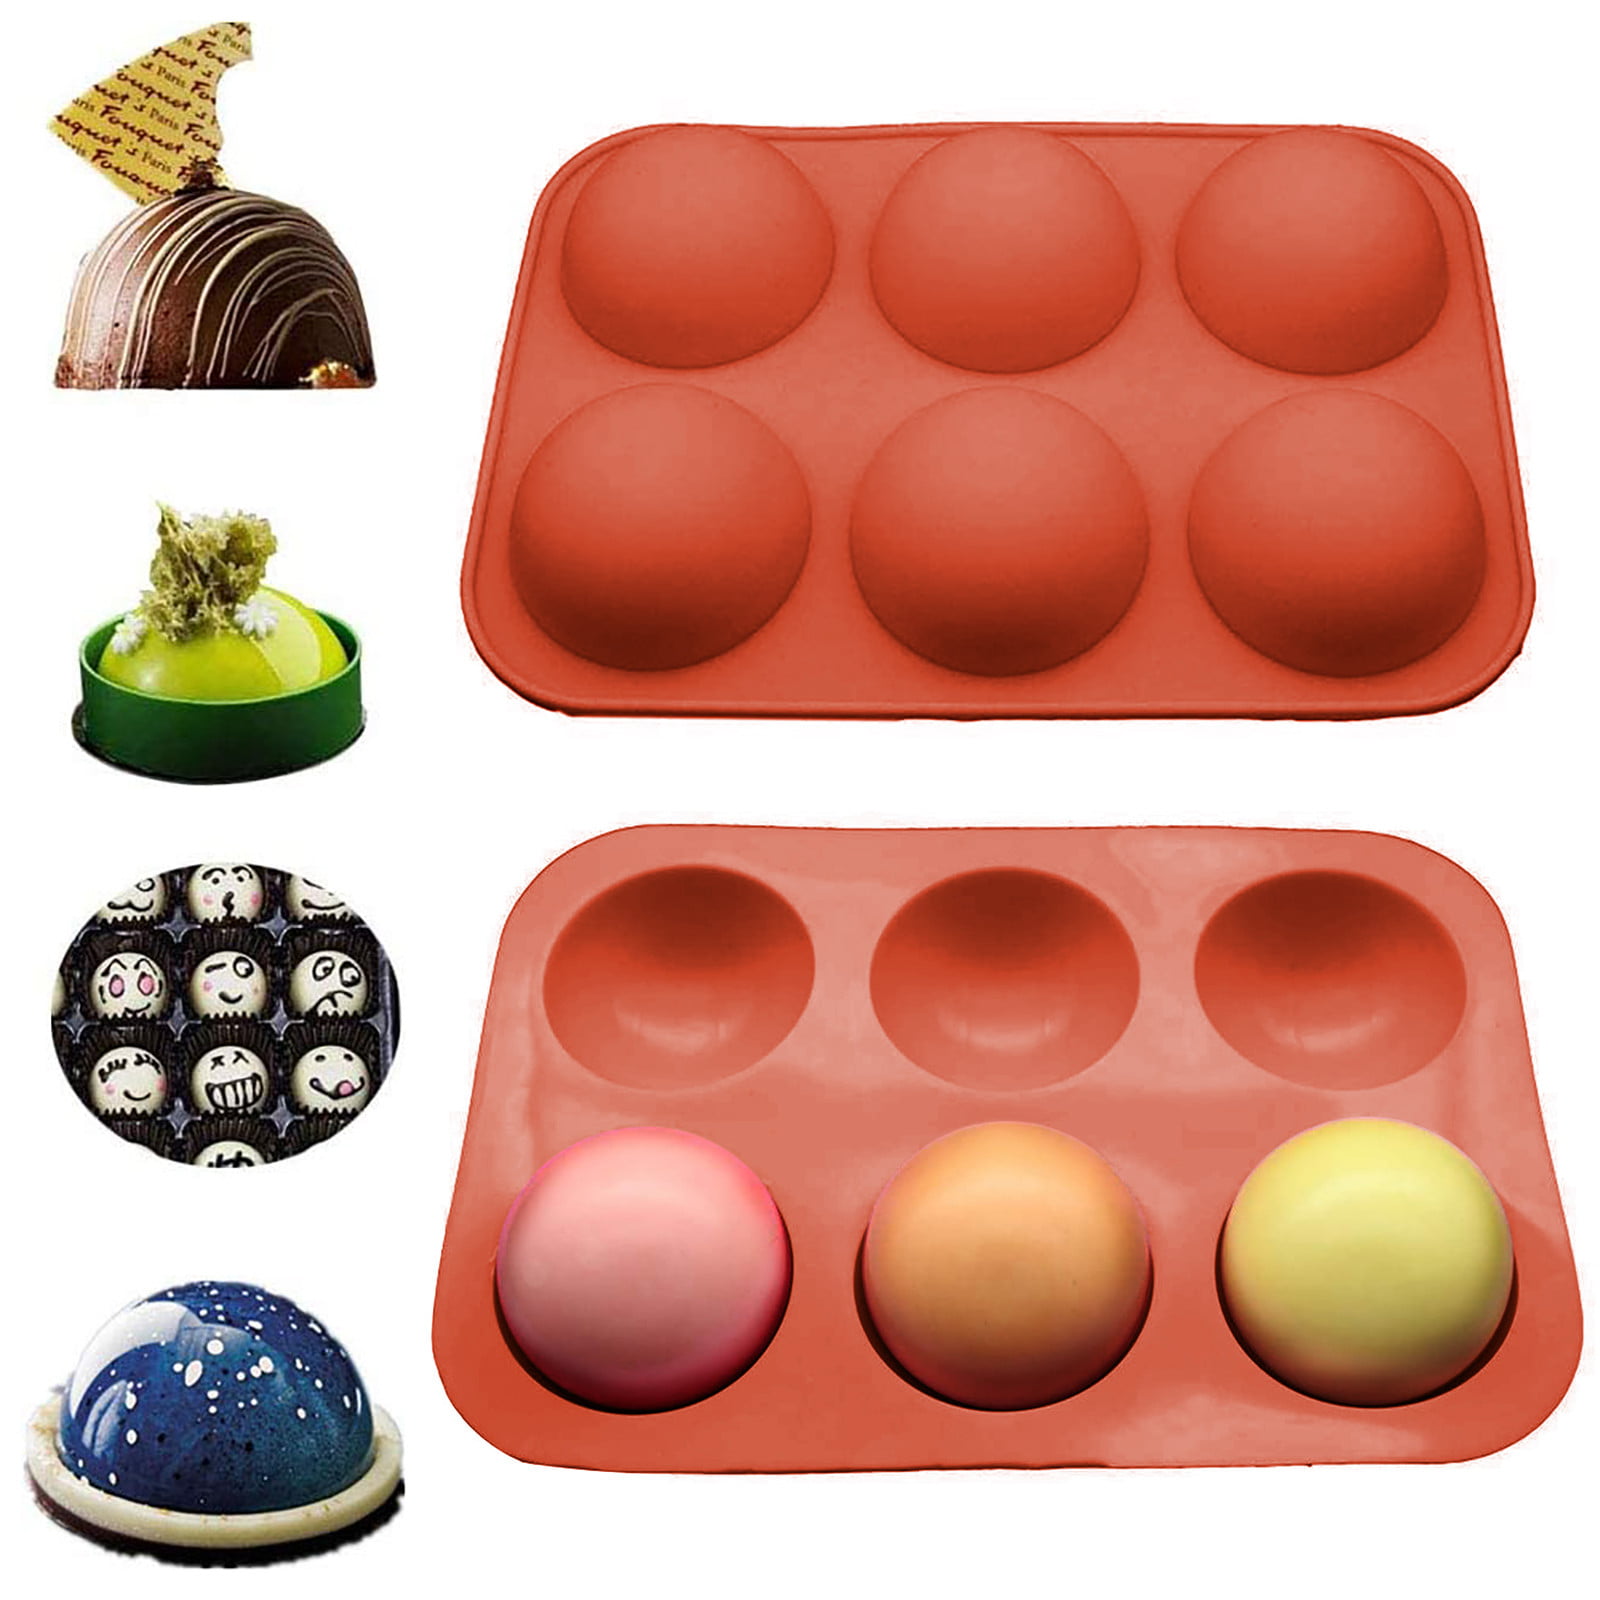 Hot Chocolate Bomb Mold Silicone Semi Ball Mold for Making Cocoa Bombs 3